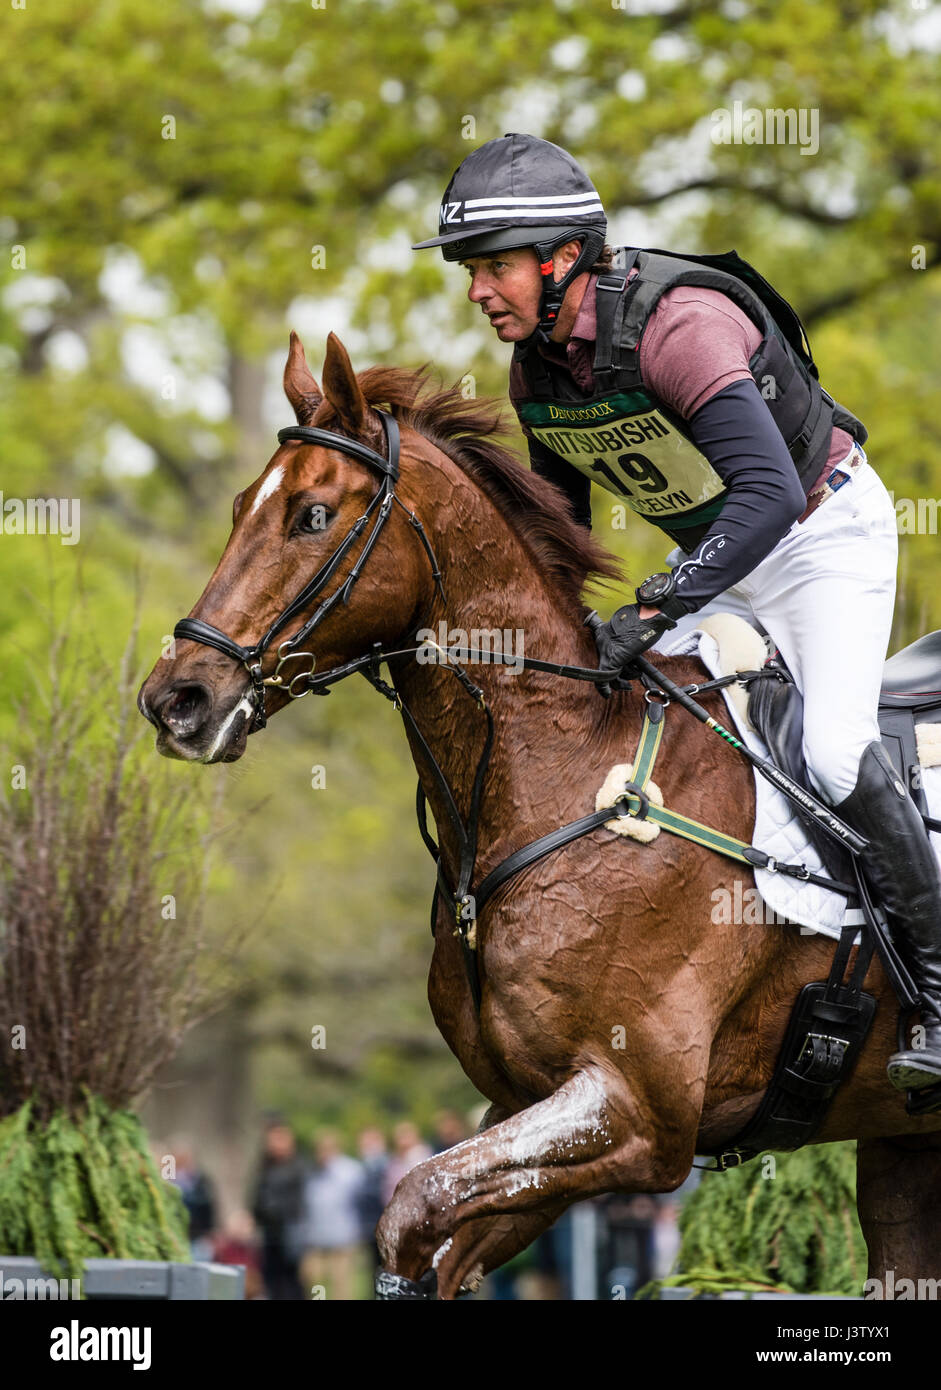 New Zealand rider Daniel Jocelyn competing on Dassett Cool Touch at the Badminton Horse Trials 2017 Stock Photo